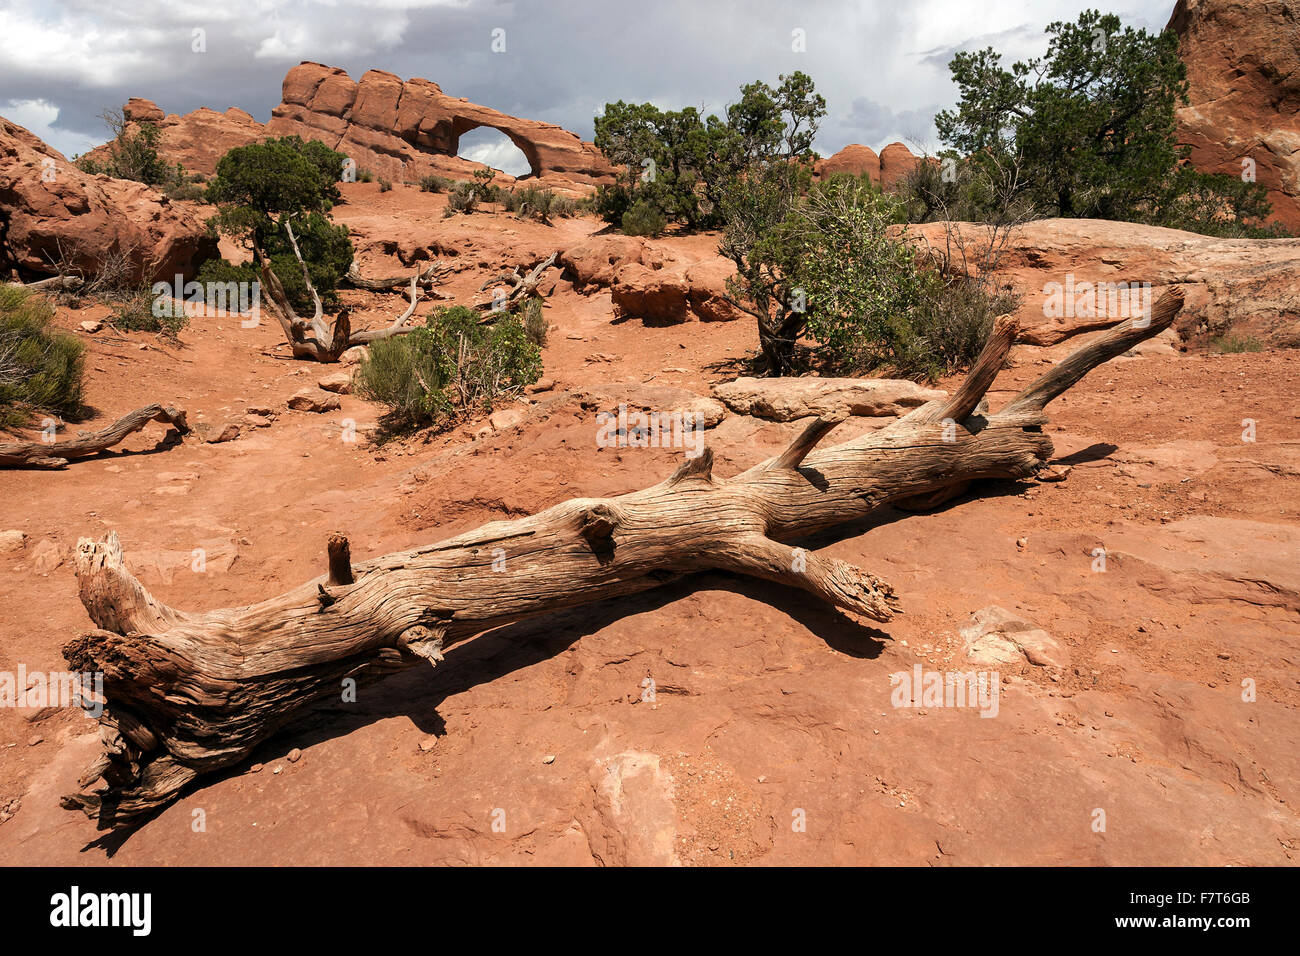 Skyline Arch, dead bristlecone pine (Pinus aristata) in front, Arches National Park, Utah, USA Stock Photo